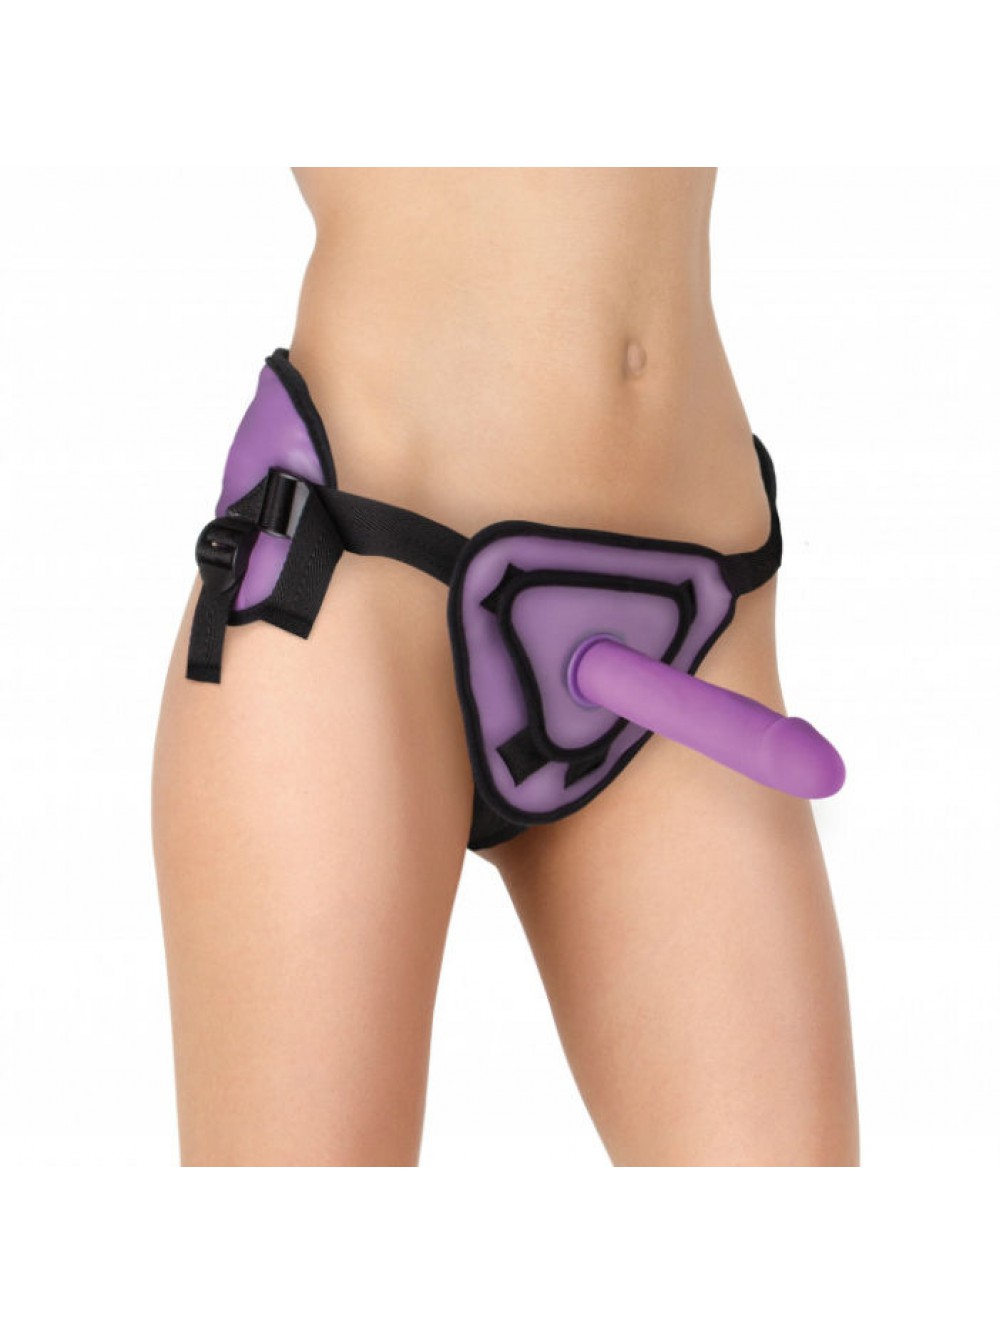 OUCH DELUXE STRAP ON SILICONE DELUXE PURPLE  20.5  CM 8714273301611